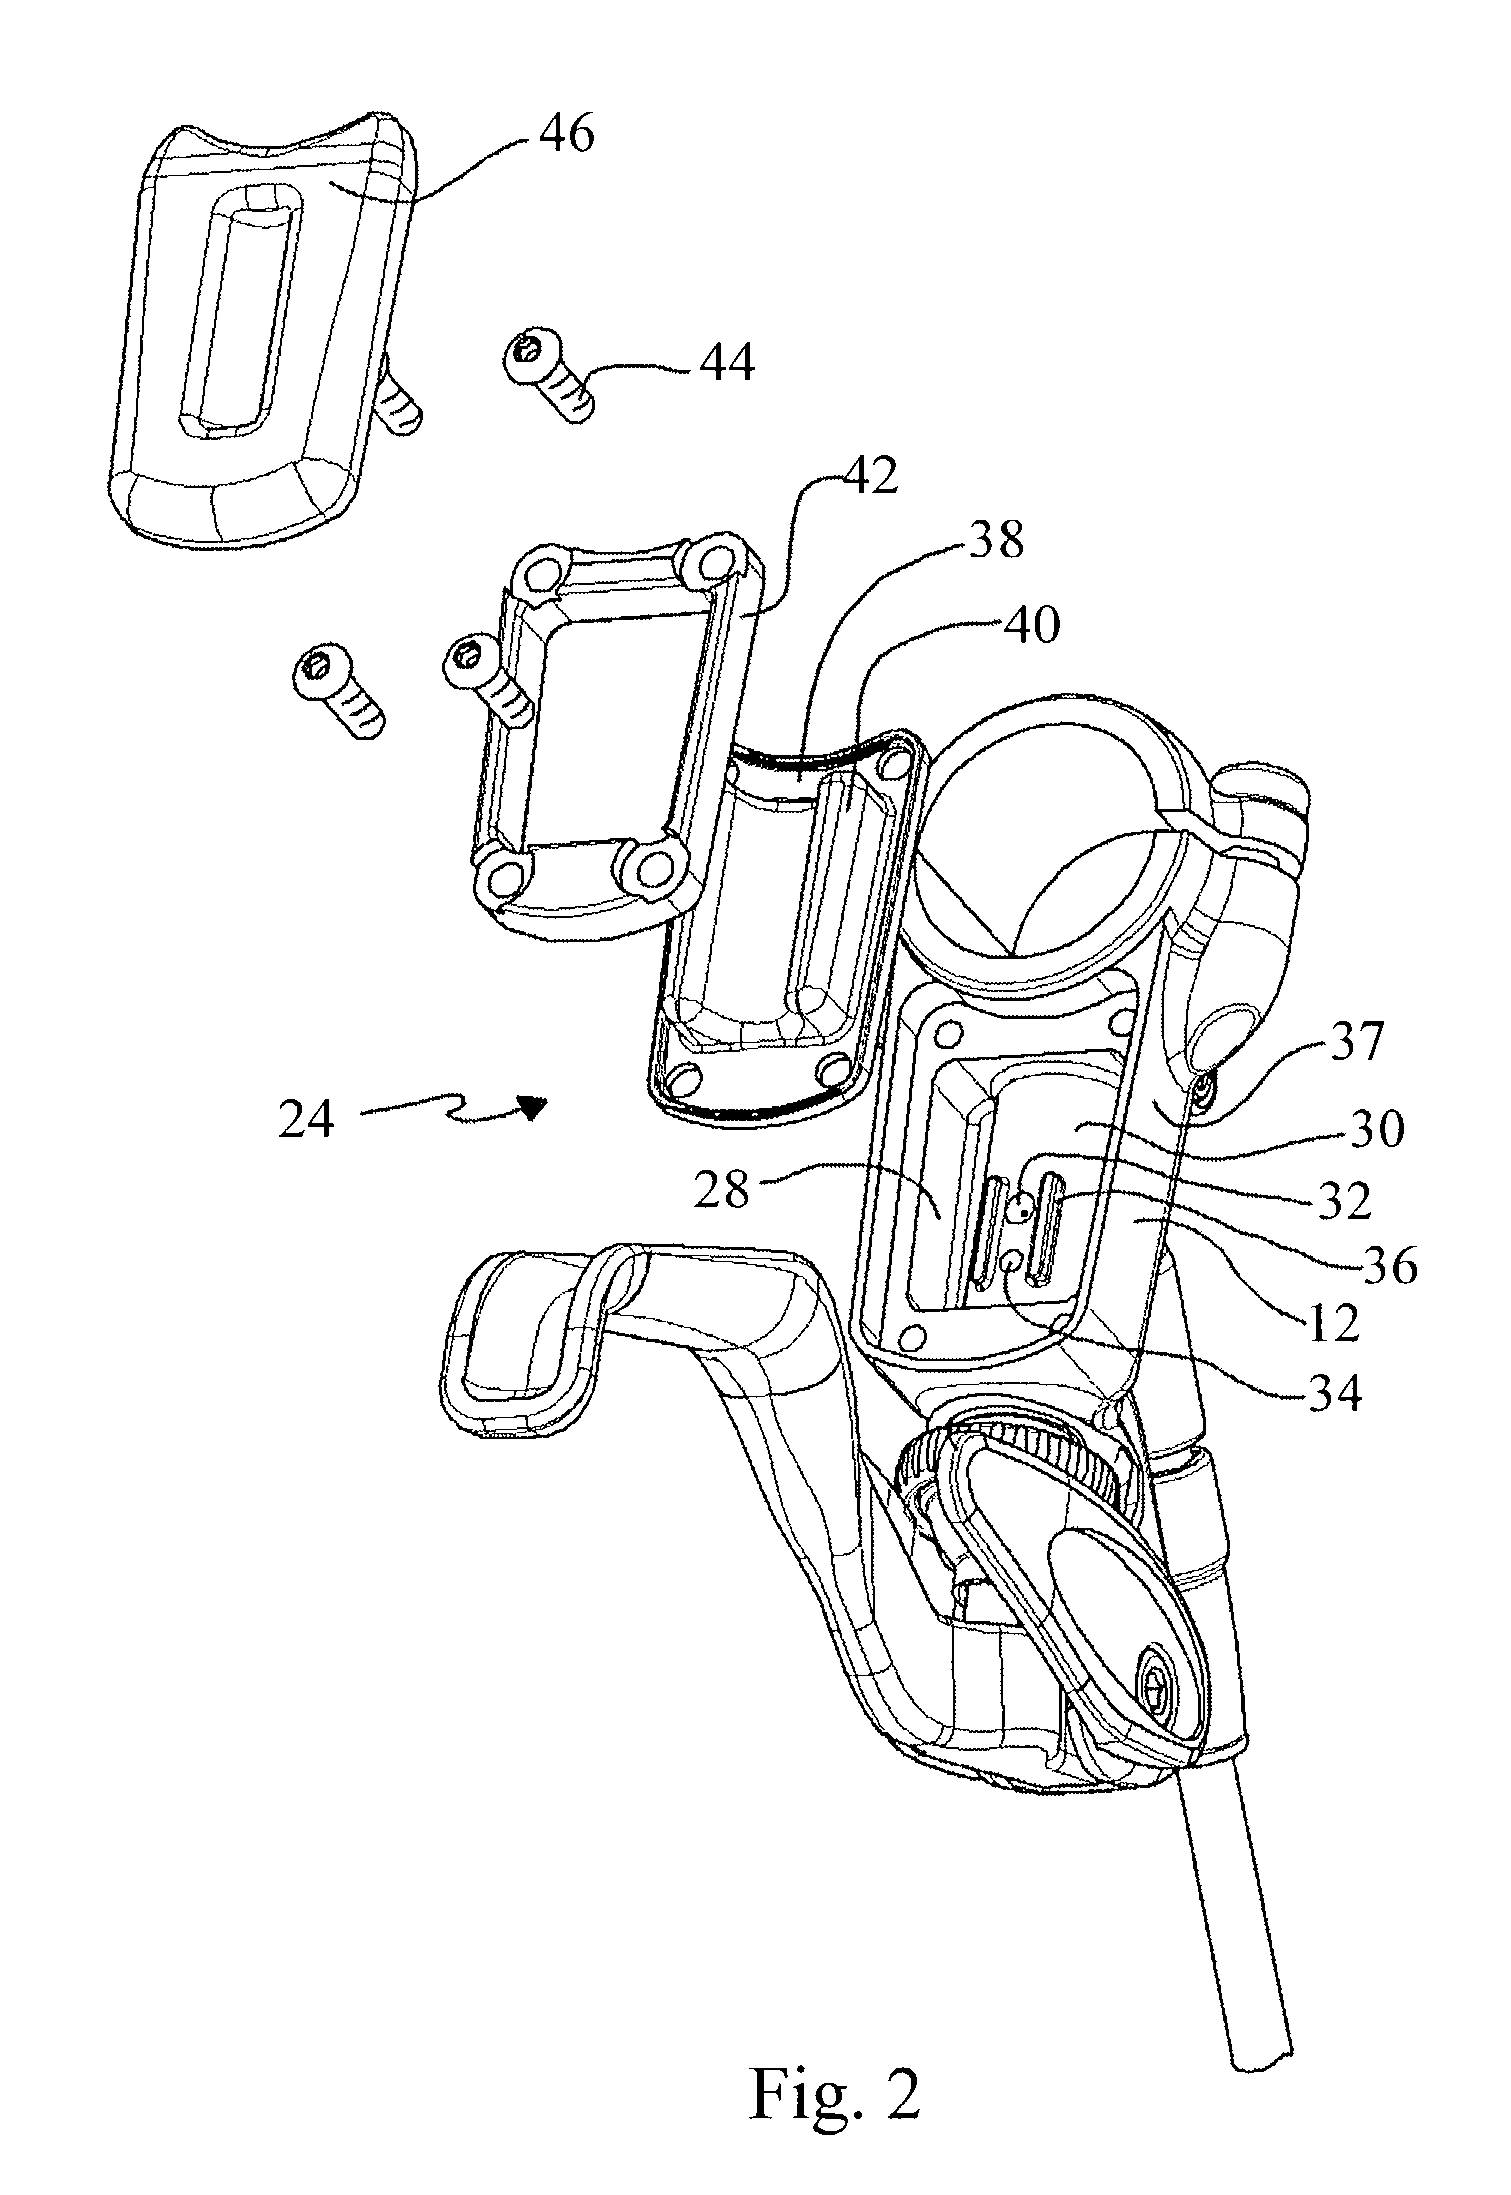 Master cylinder lever for a hydraulic disc brake having favorable handle pivot geometry